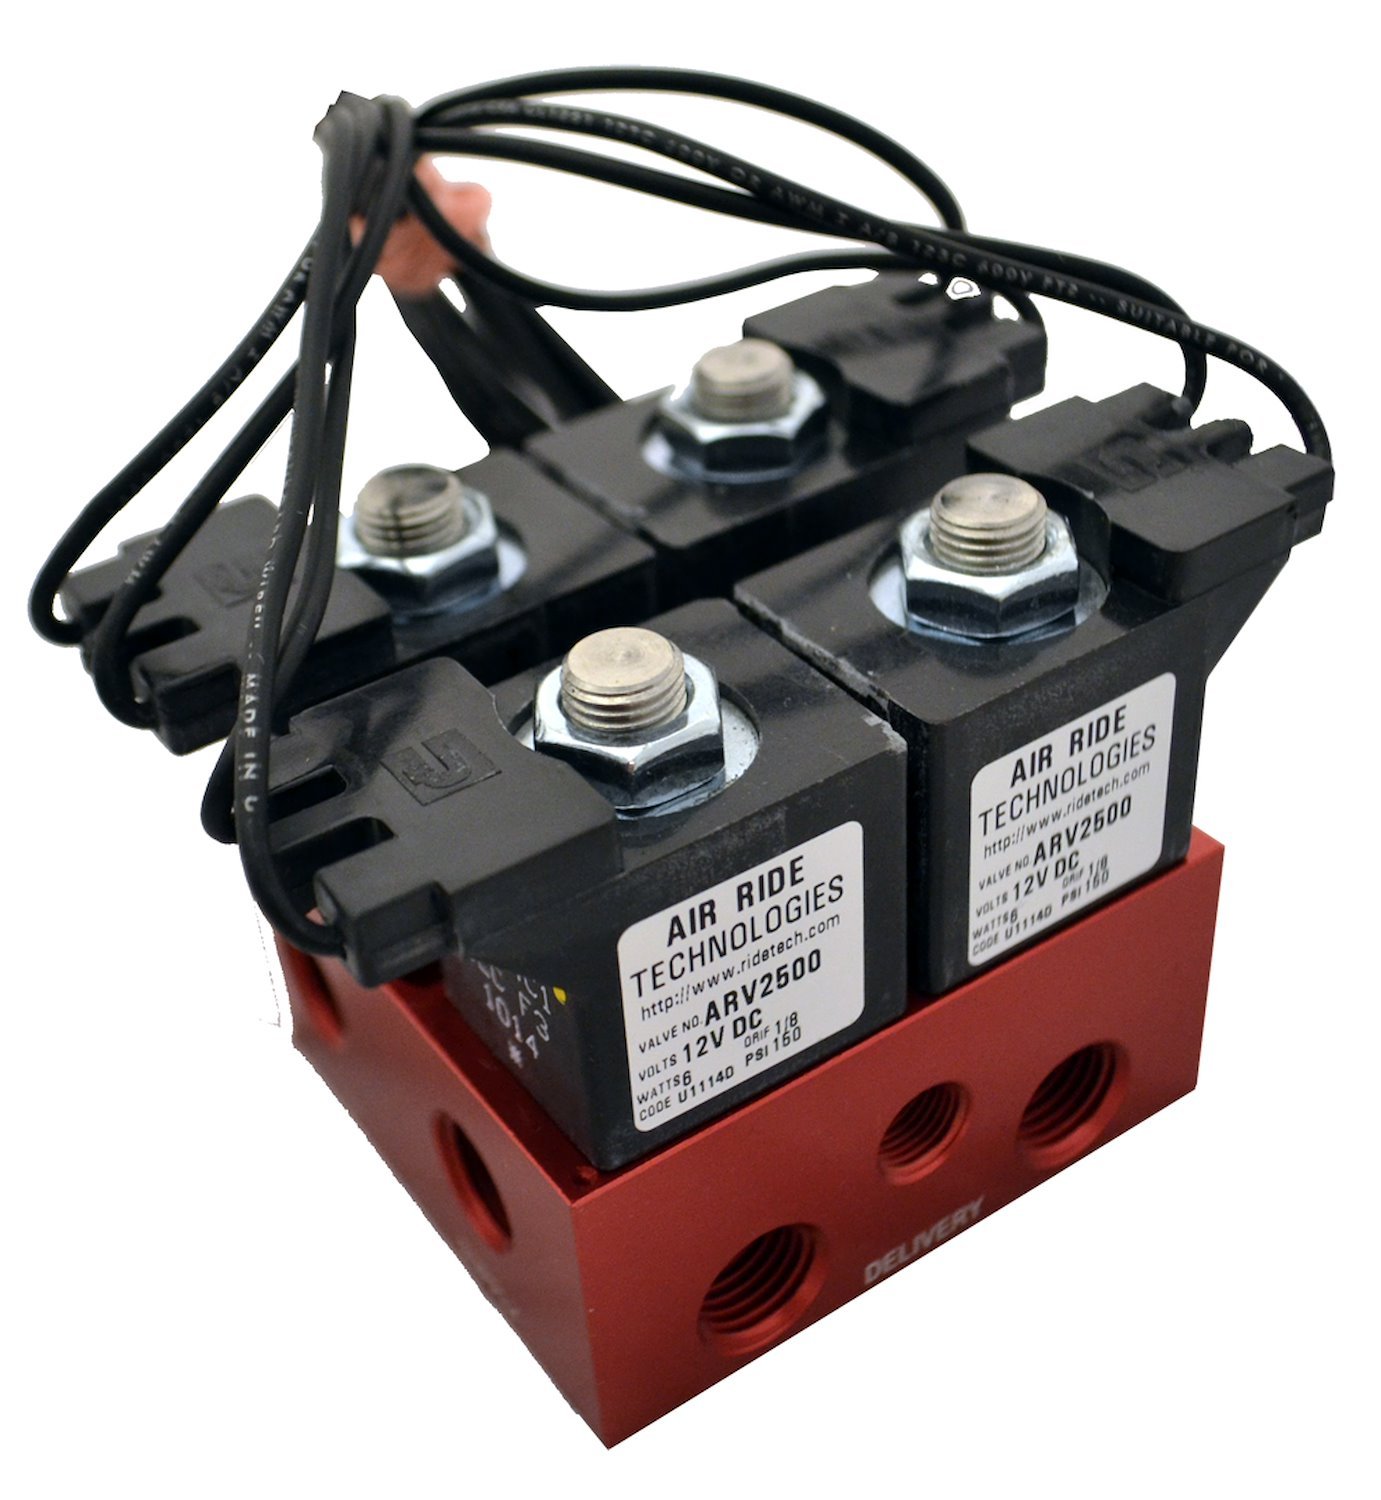 Air Valve Block. RidePro 2-Way with 1/4 NPT Ports. Fittings Sold Separately.